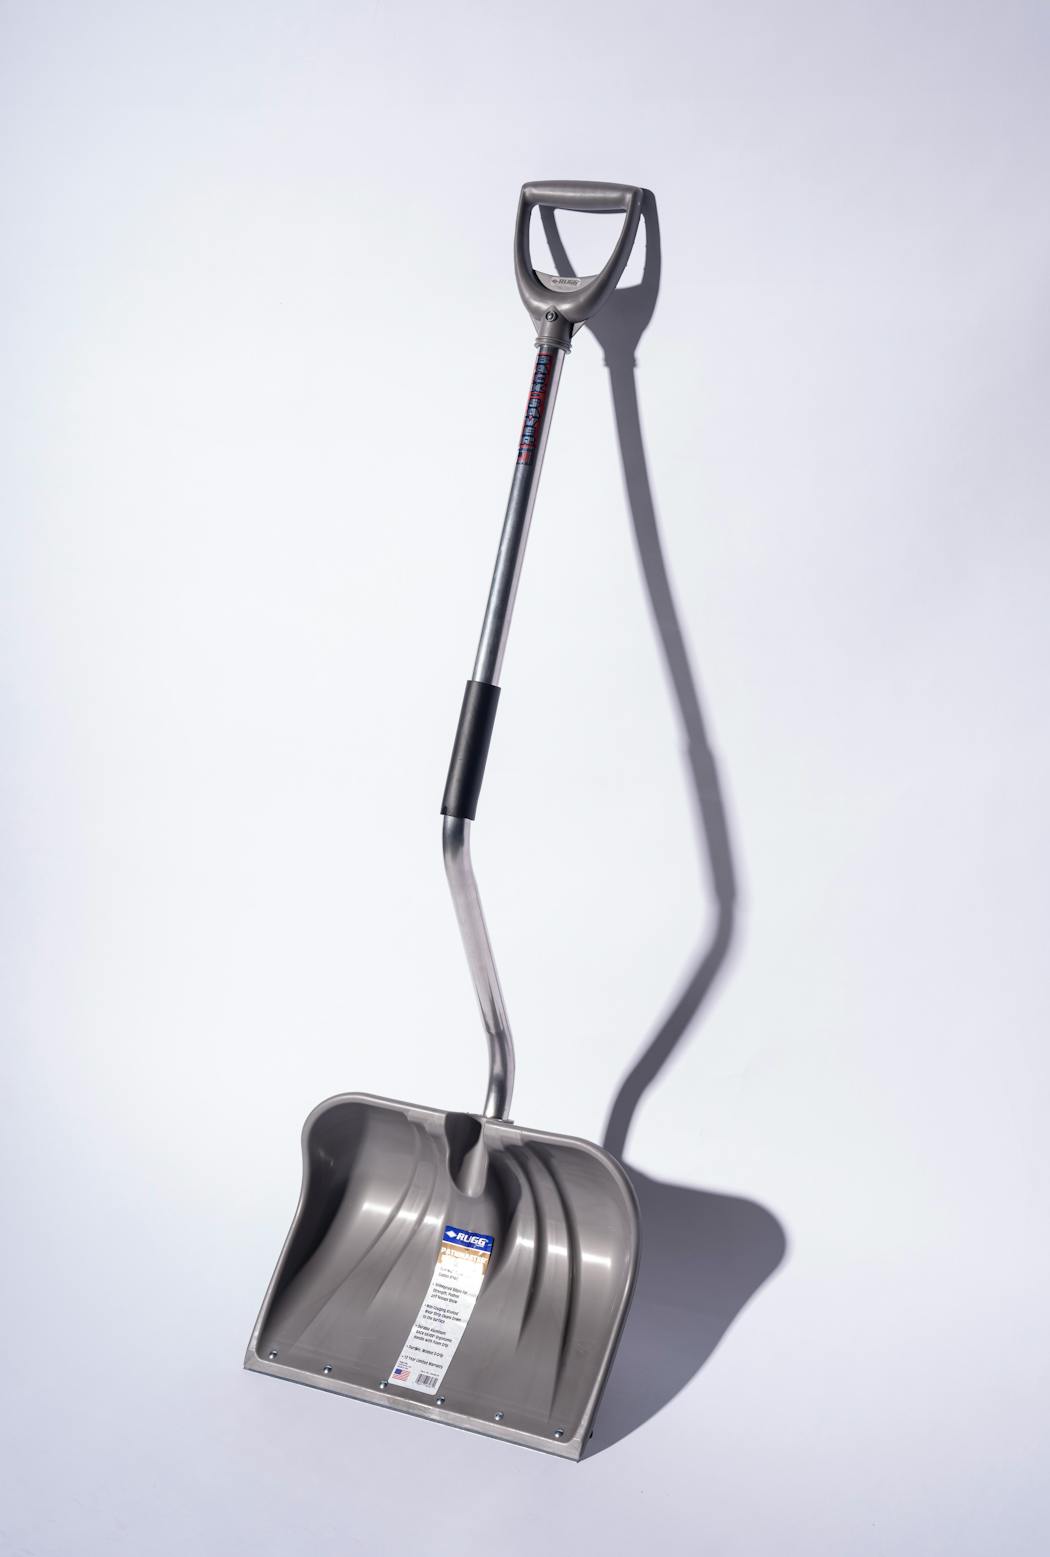 A bent-handle shove, the Pathmaster Ultra Back-Saver by Rugg.